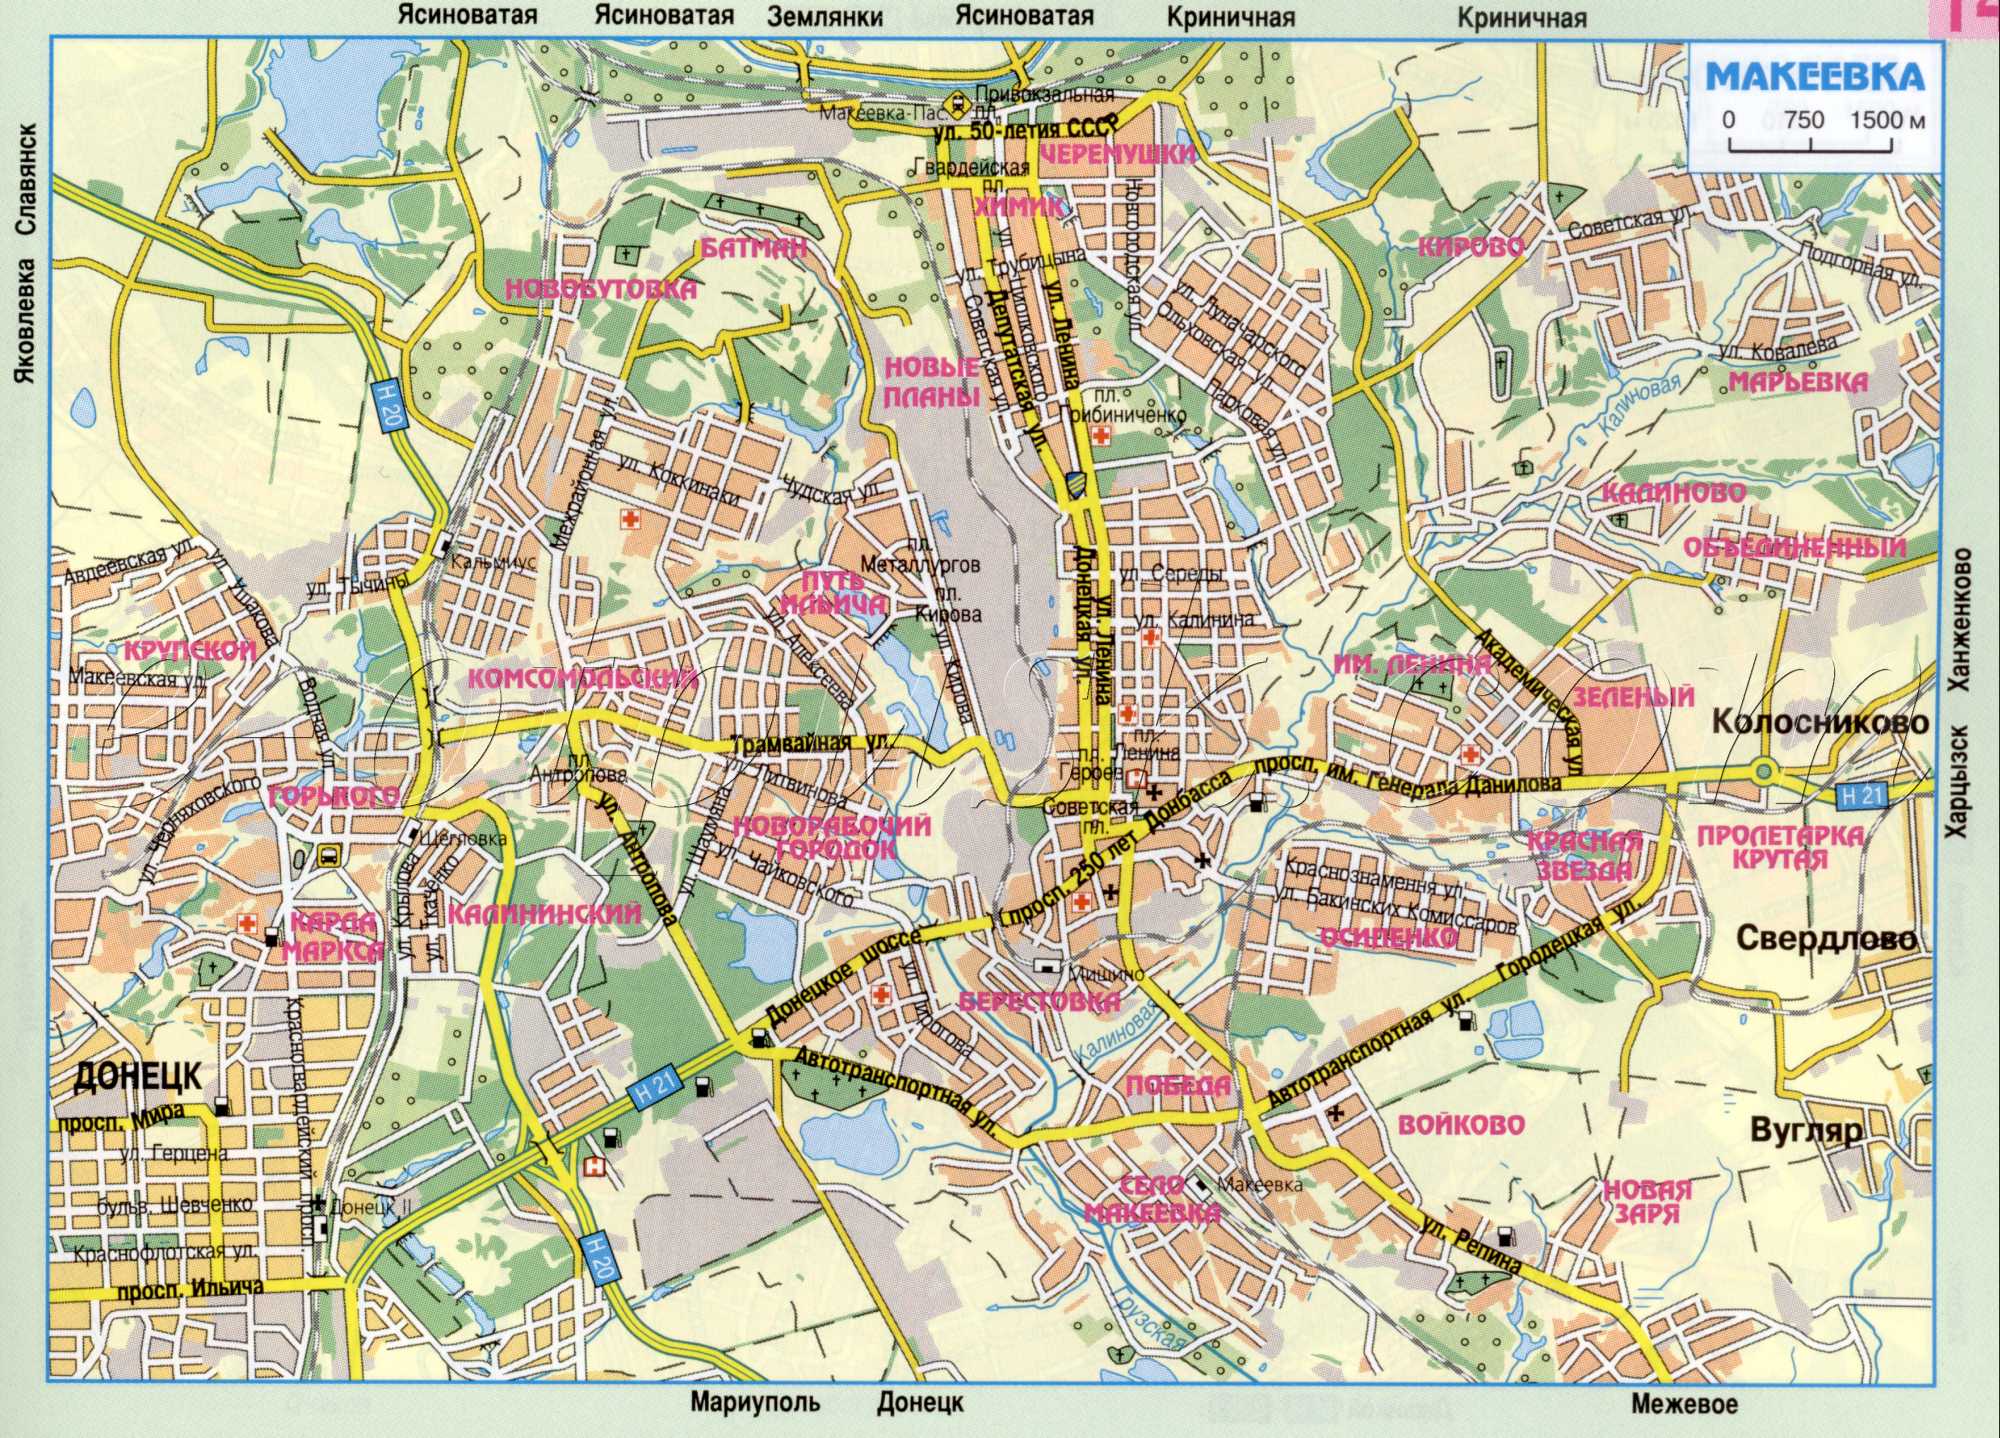 Makiyivka Map (the main car road town of Makeyevka, Donetsk region on the scale of 1cm: 750m). download for free